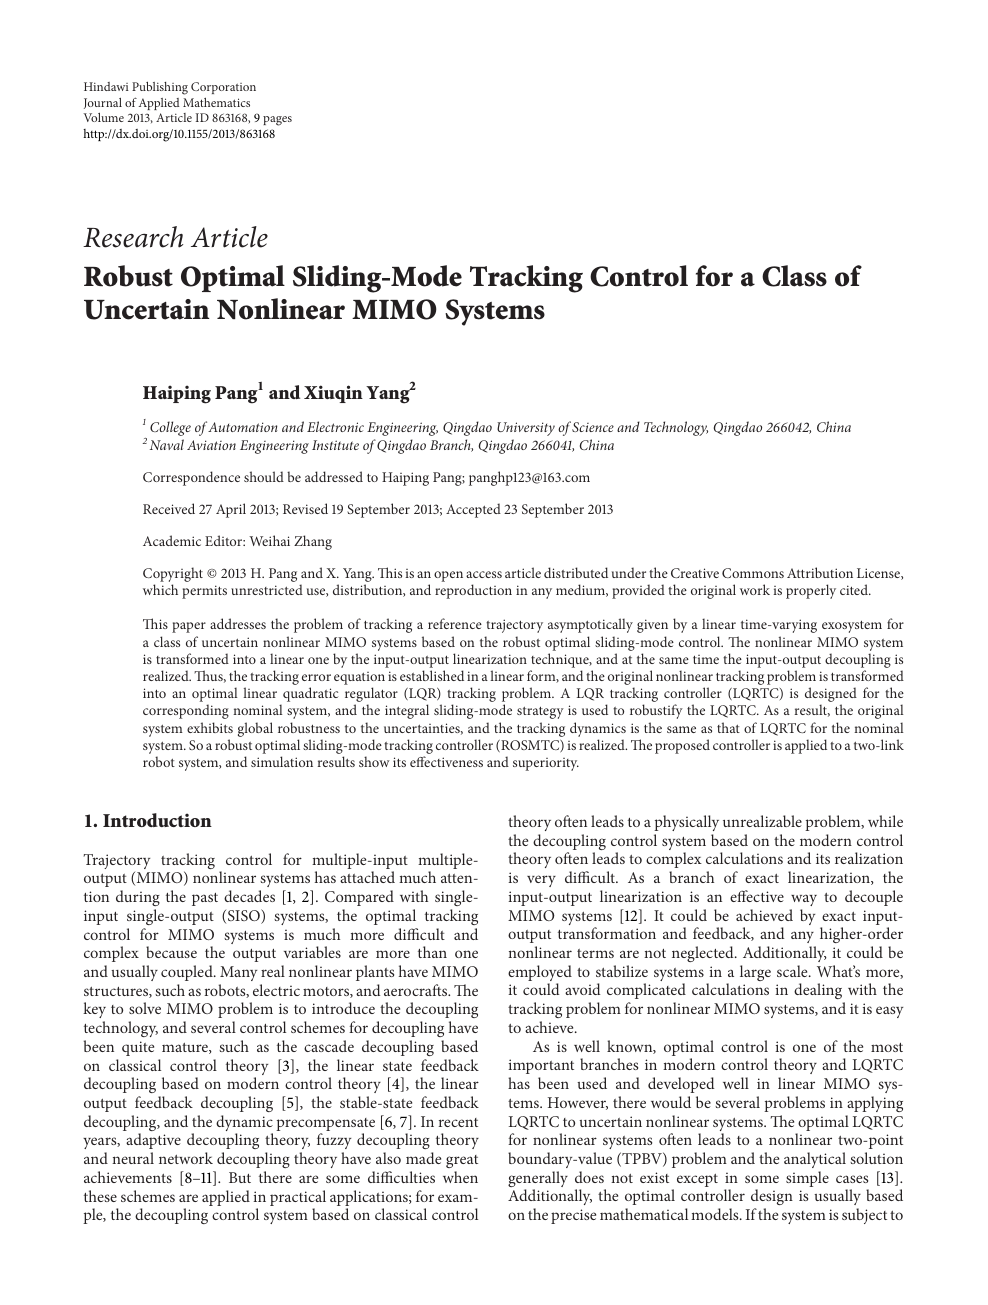 Robust Optimal Sliding Mode Tracking Control For A Class Of Uncertain Nonlinear Mimo Systems Topic Of Research Paper In Mathematics Download Scholarly Article Pdf And Read For Free On Cyberleninka Open Science